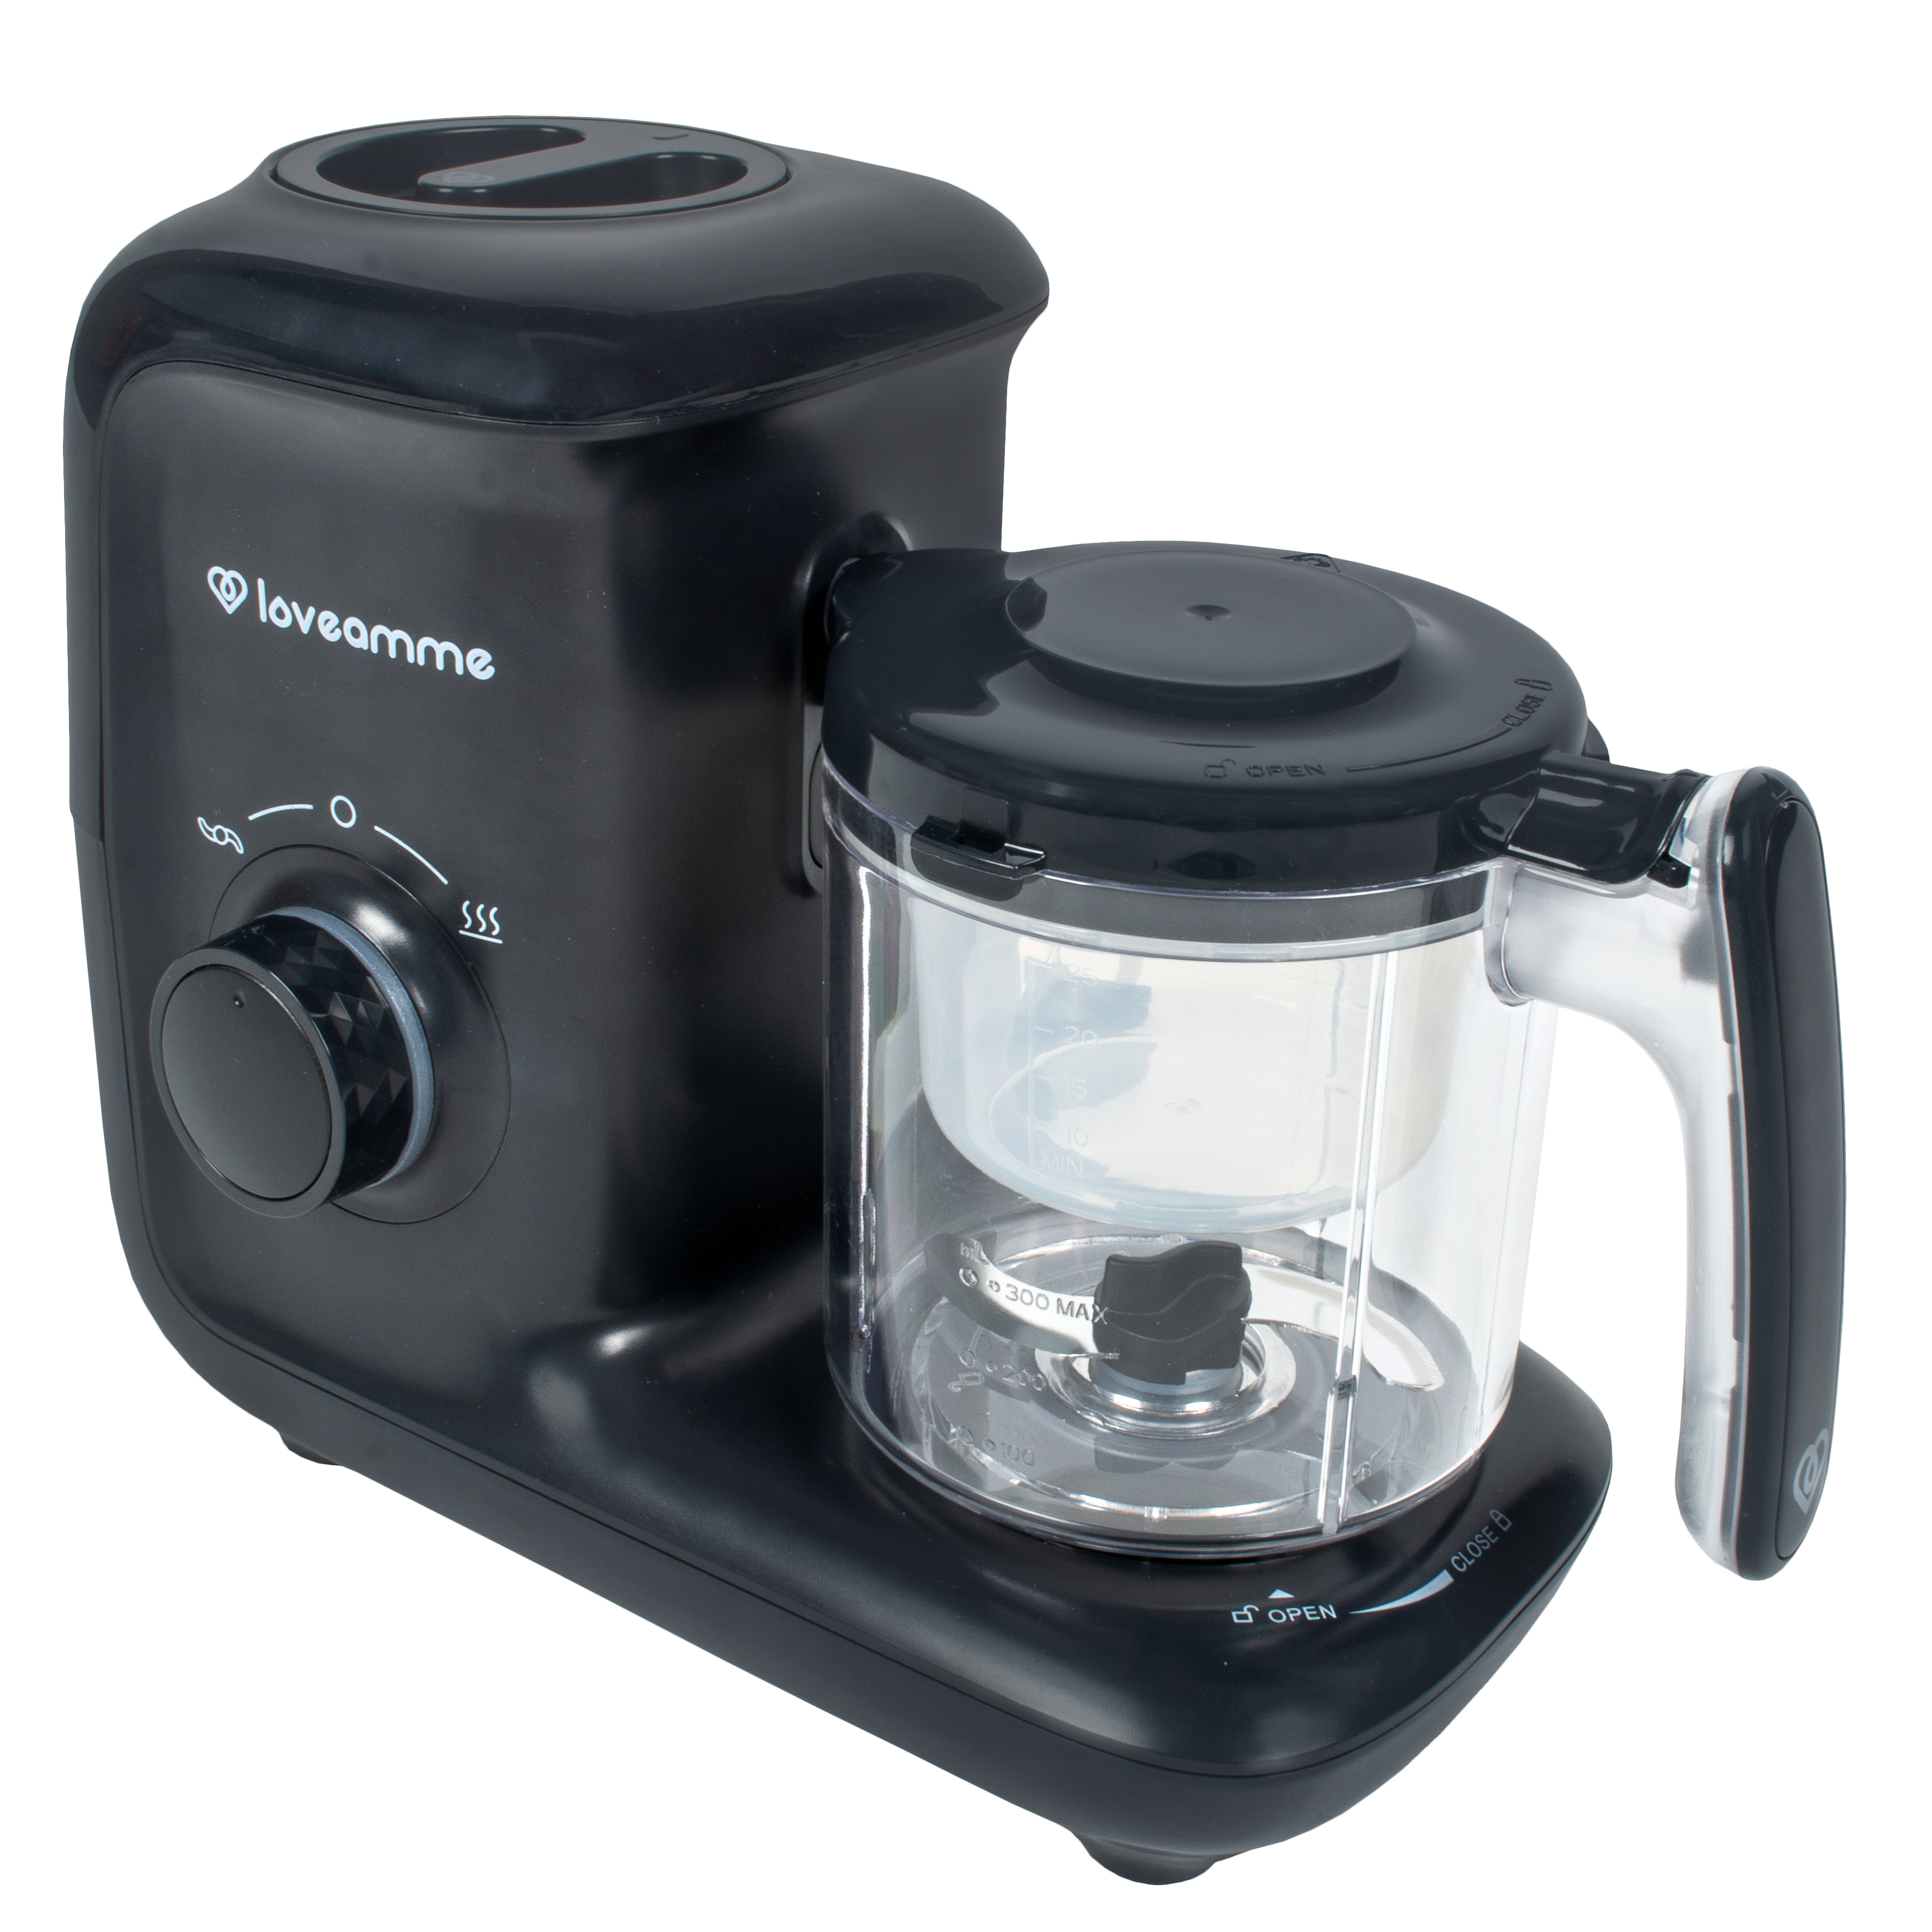 LoveCook Mate 6-in-1 Baby Food Processor